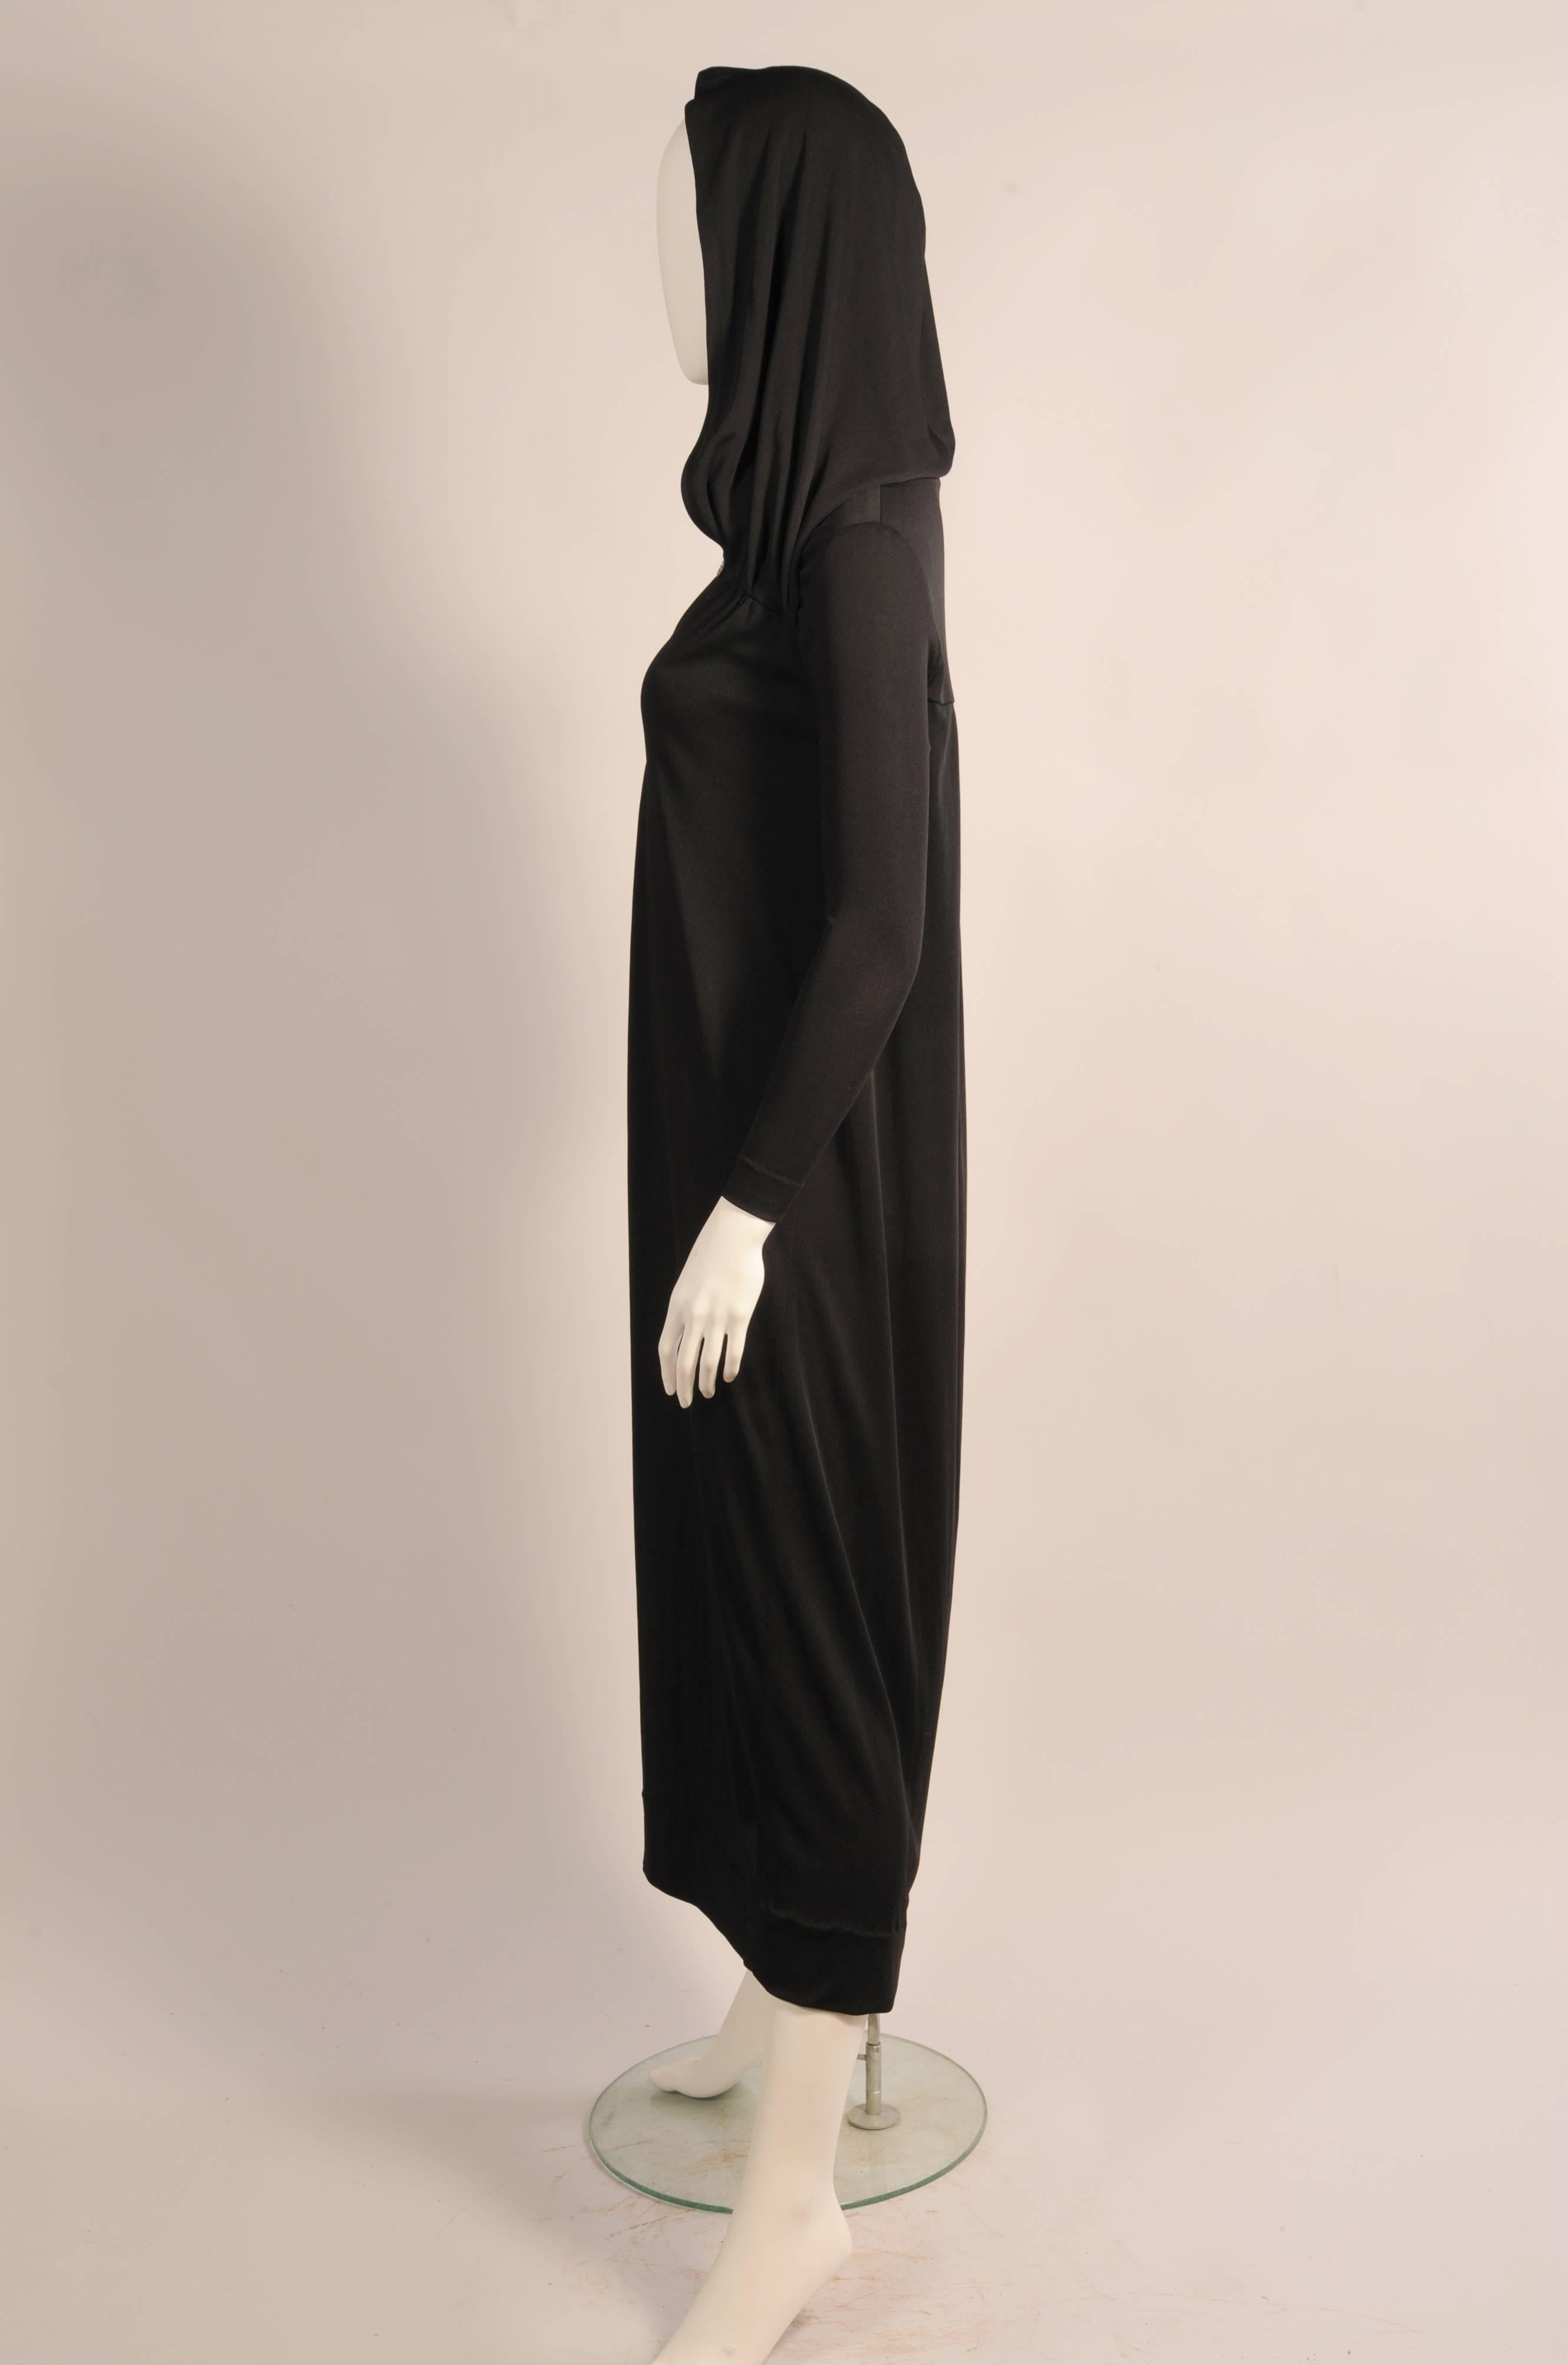 This sleek black dress would be absolutely perfect to wear the exhibition Heavenly Bodies, Fashion and the Catholic Imagination currently on view at the Metropolitan Museum. The strong religious overtones in the hooded dress could be inspired by the